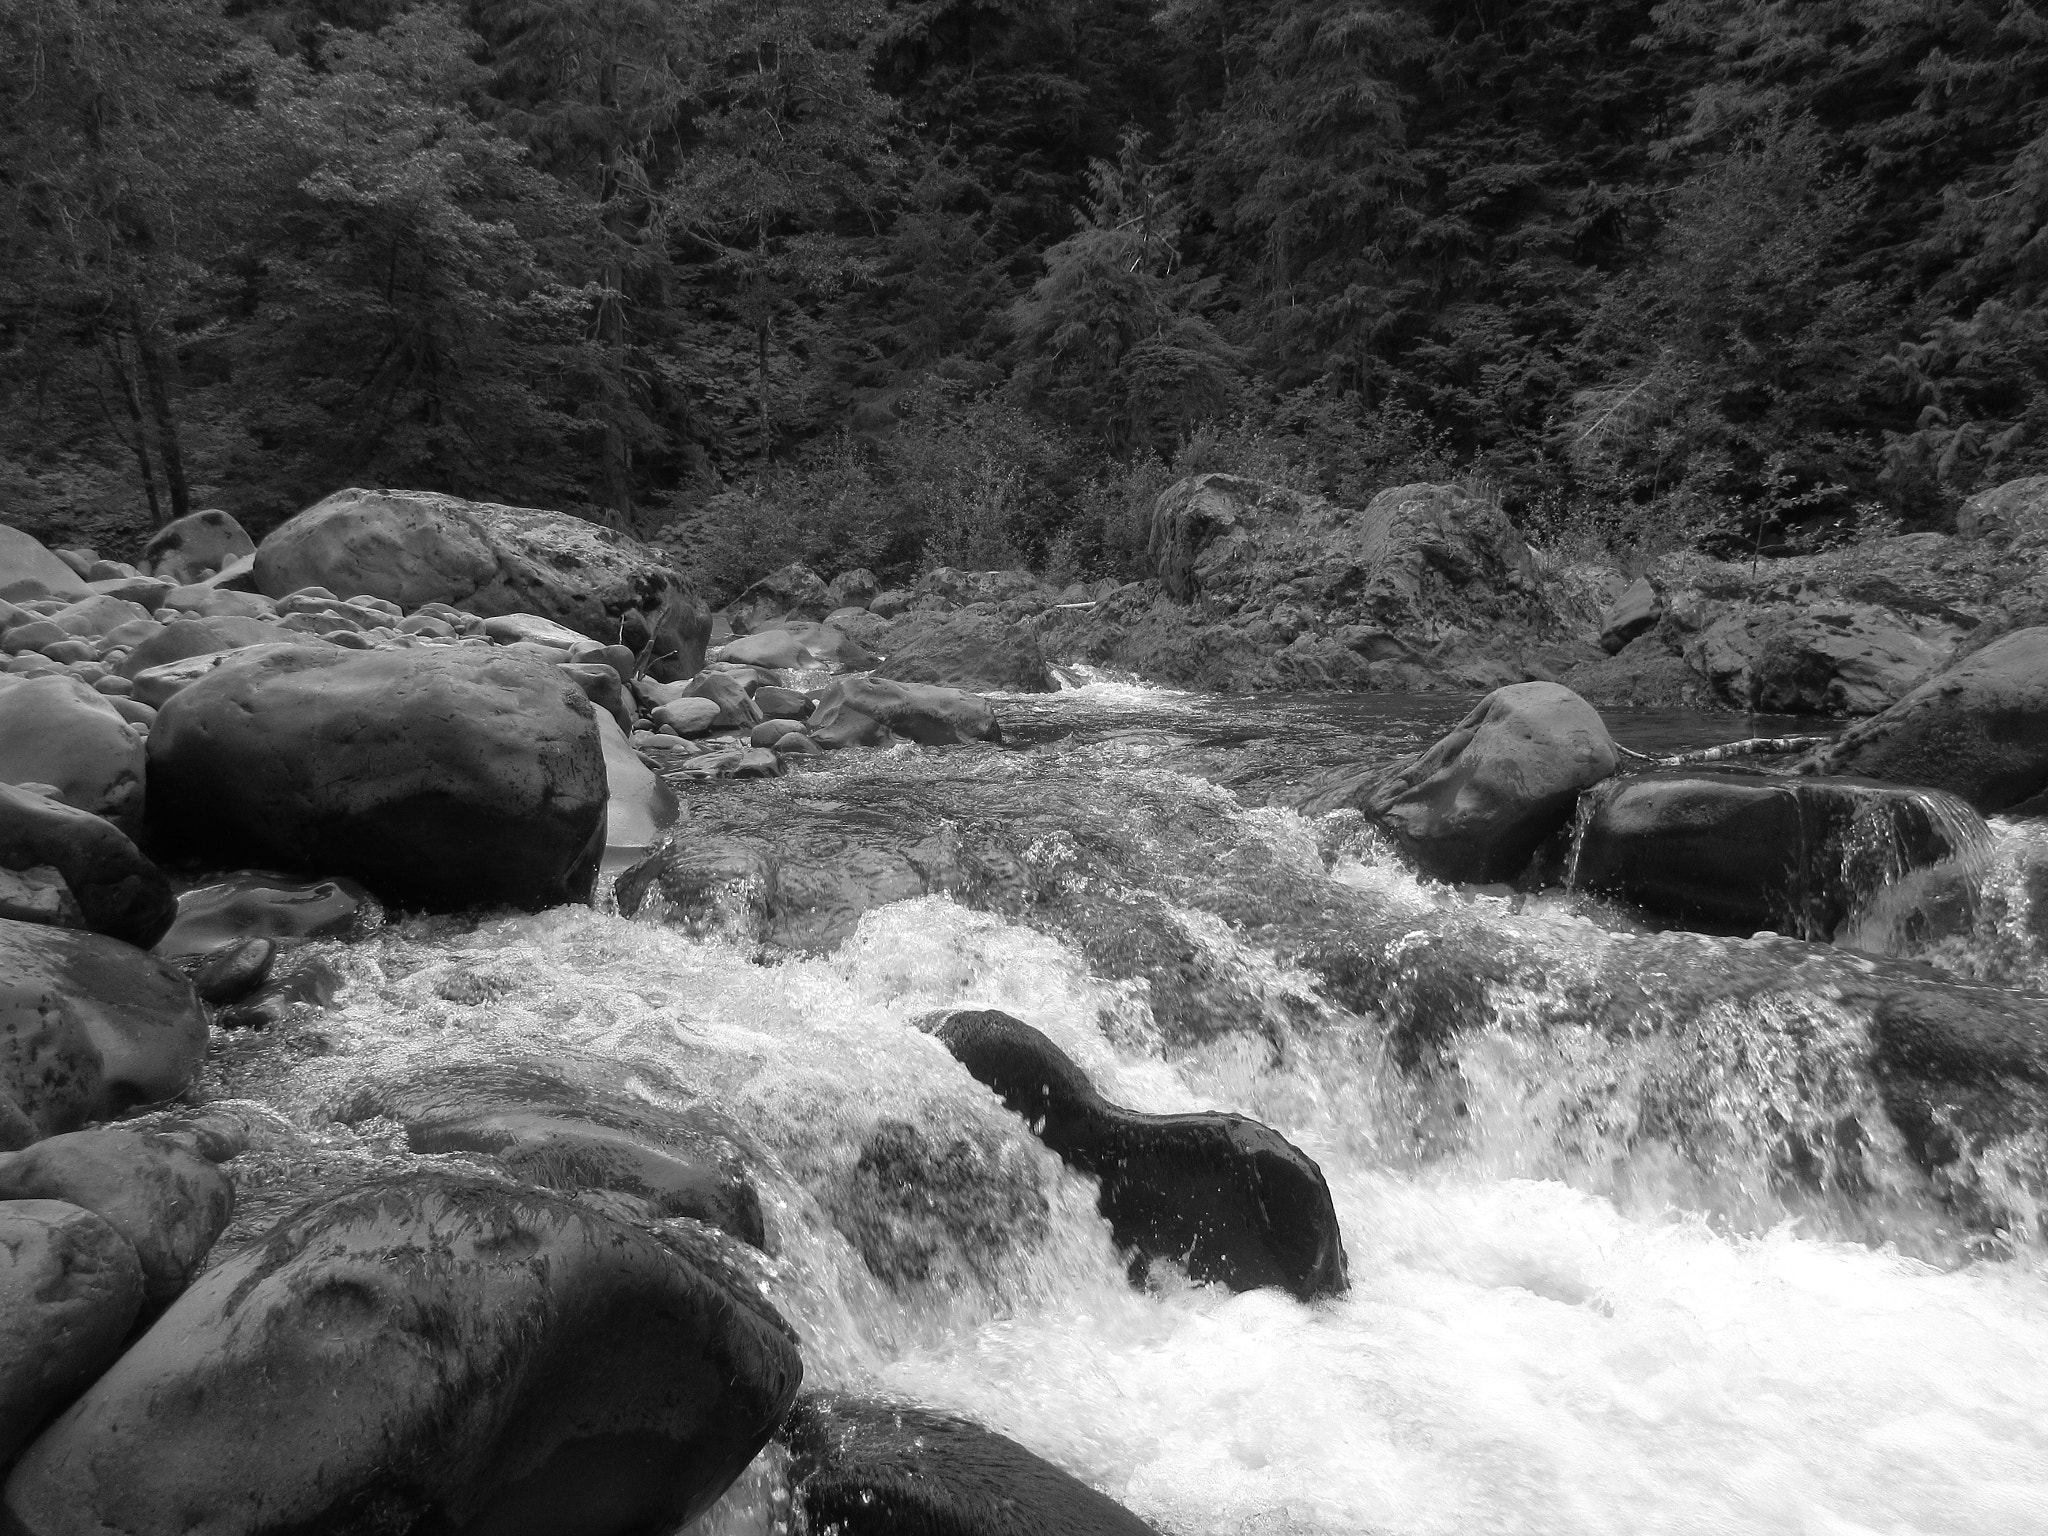 Canon PowerShot ELPH 360 HS (IXUS 285 HS / IXY 650) sample photo. Black and white river and rocks rapids photography